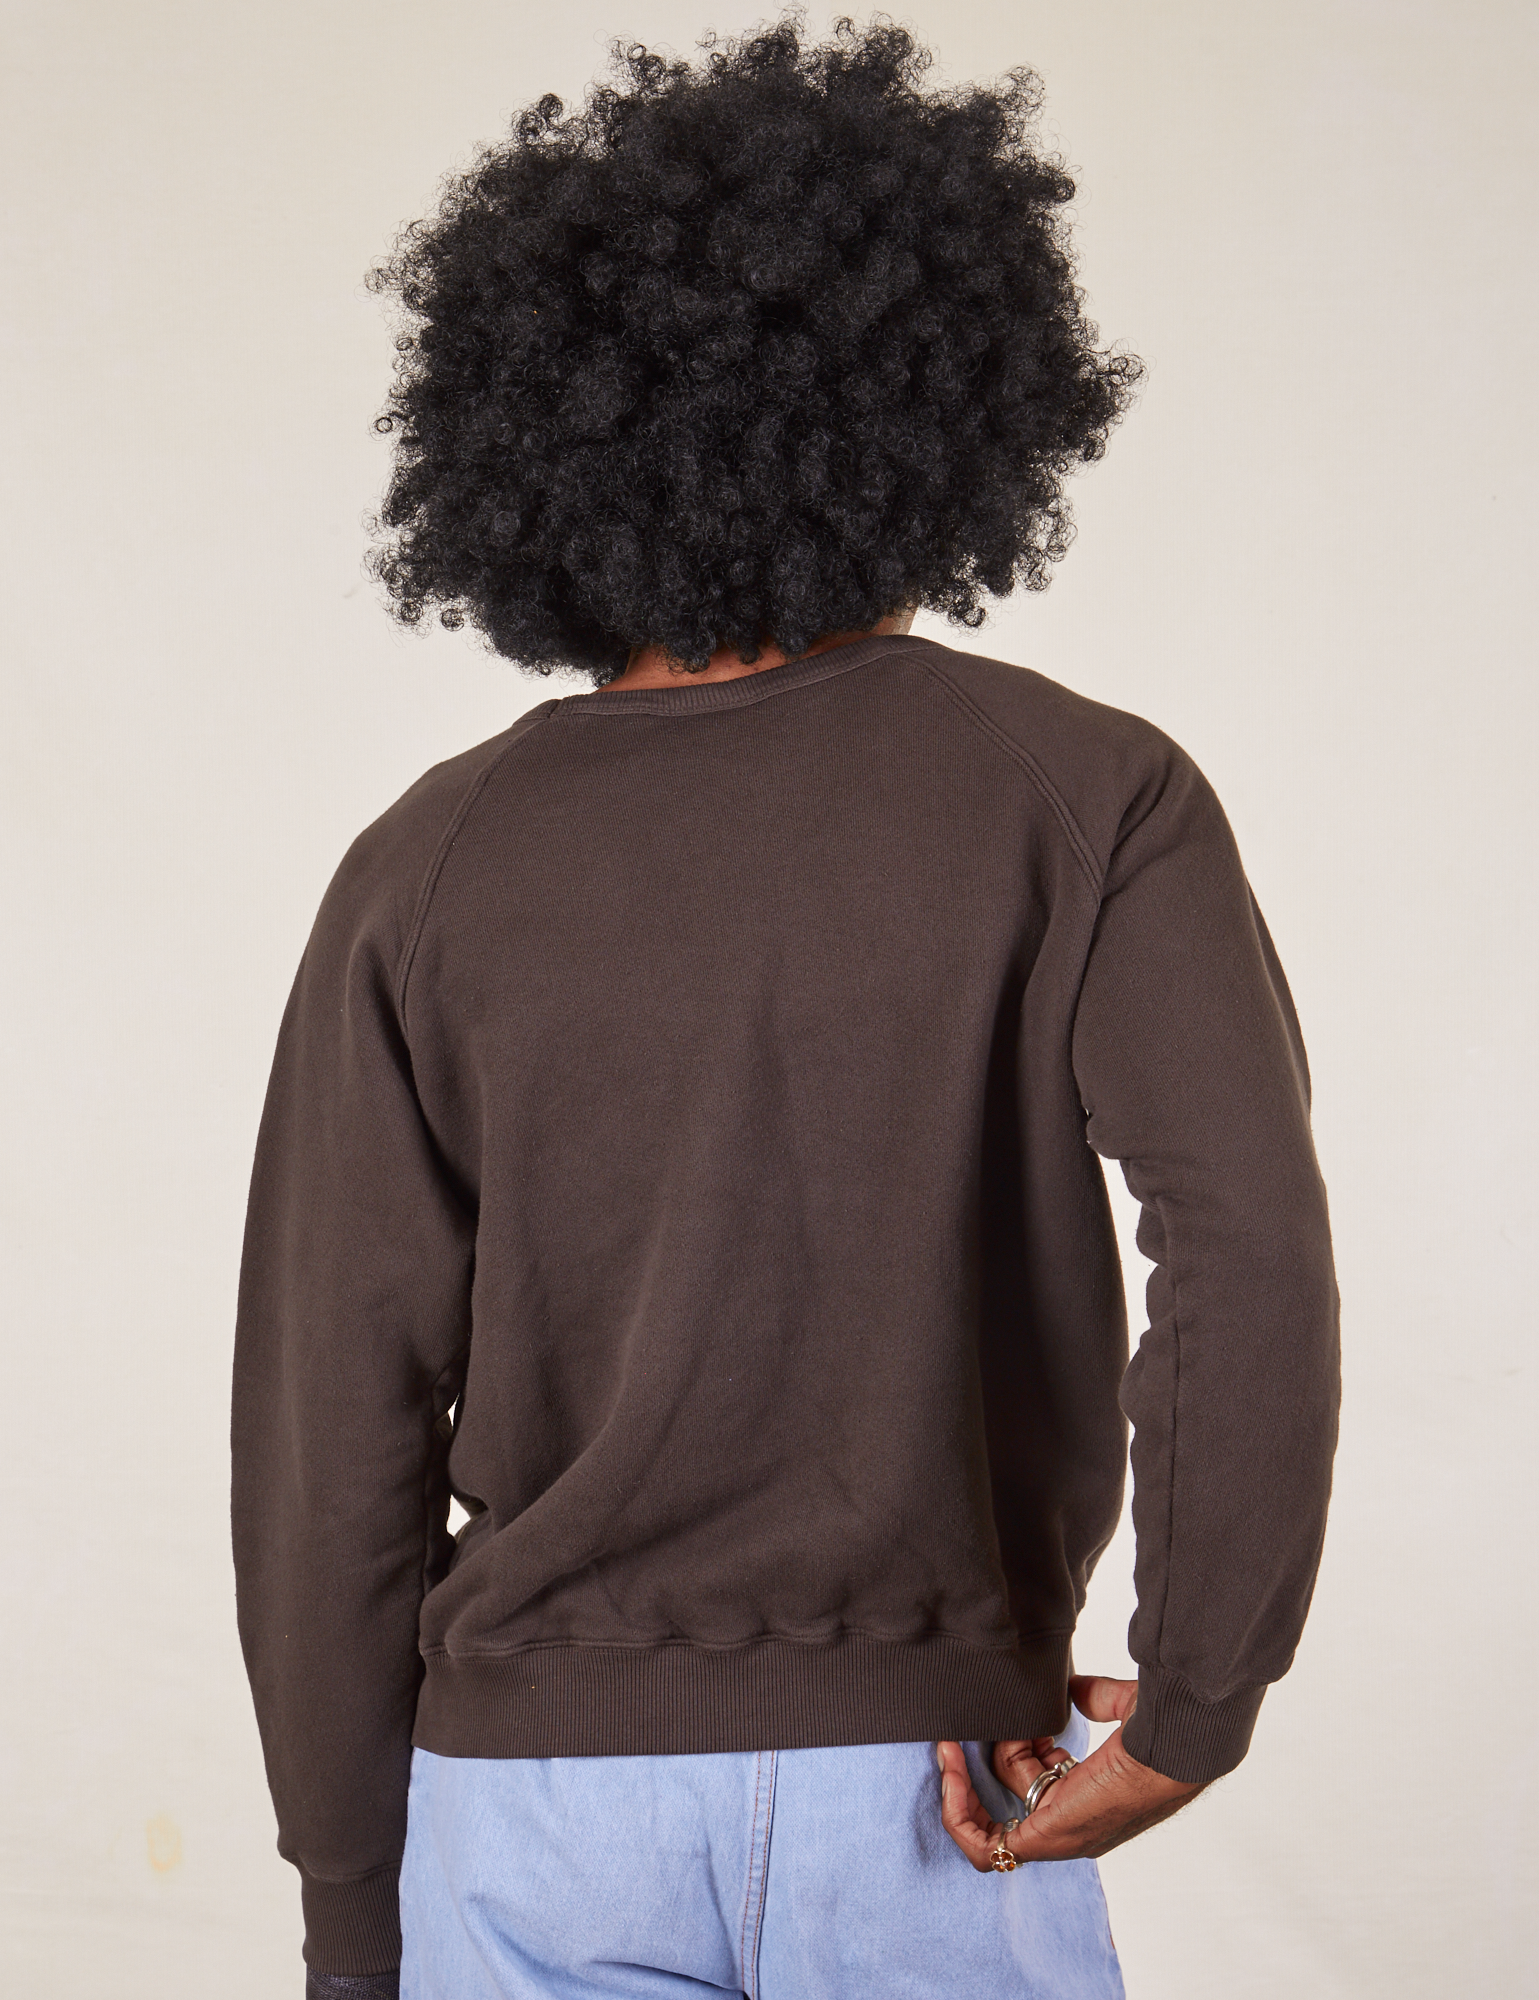 Back view of Heavyweight Crew in Espresso Brown on Jerrod